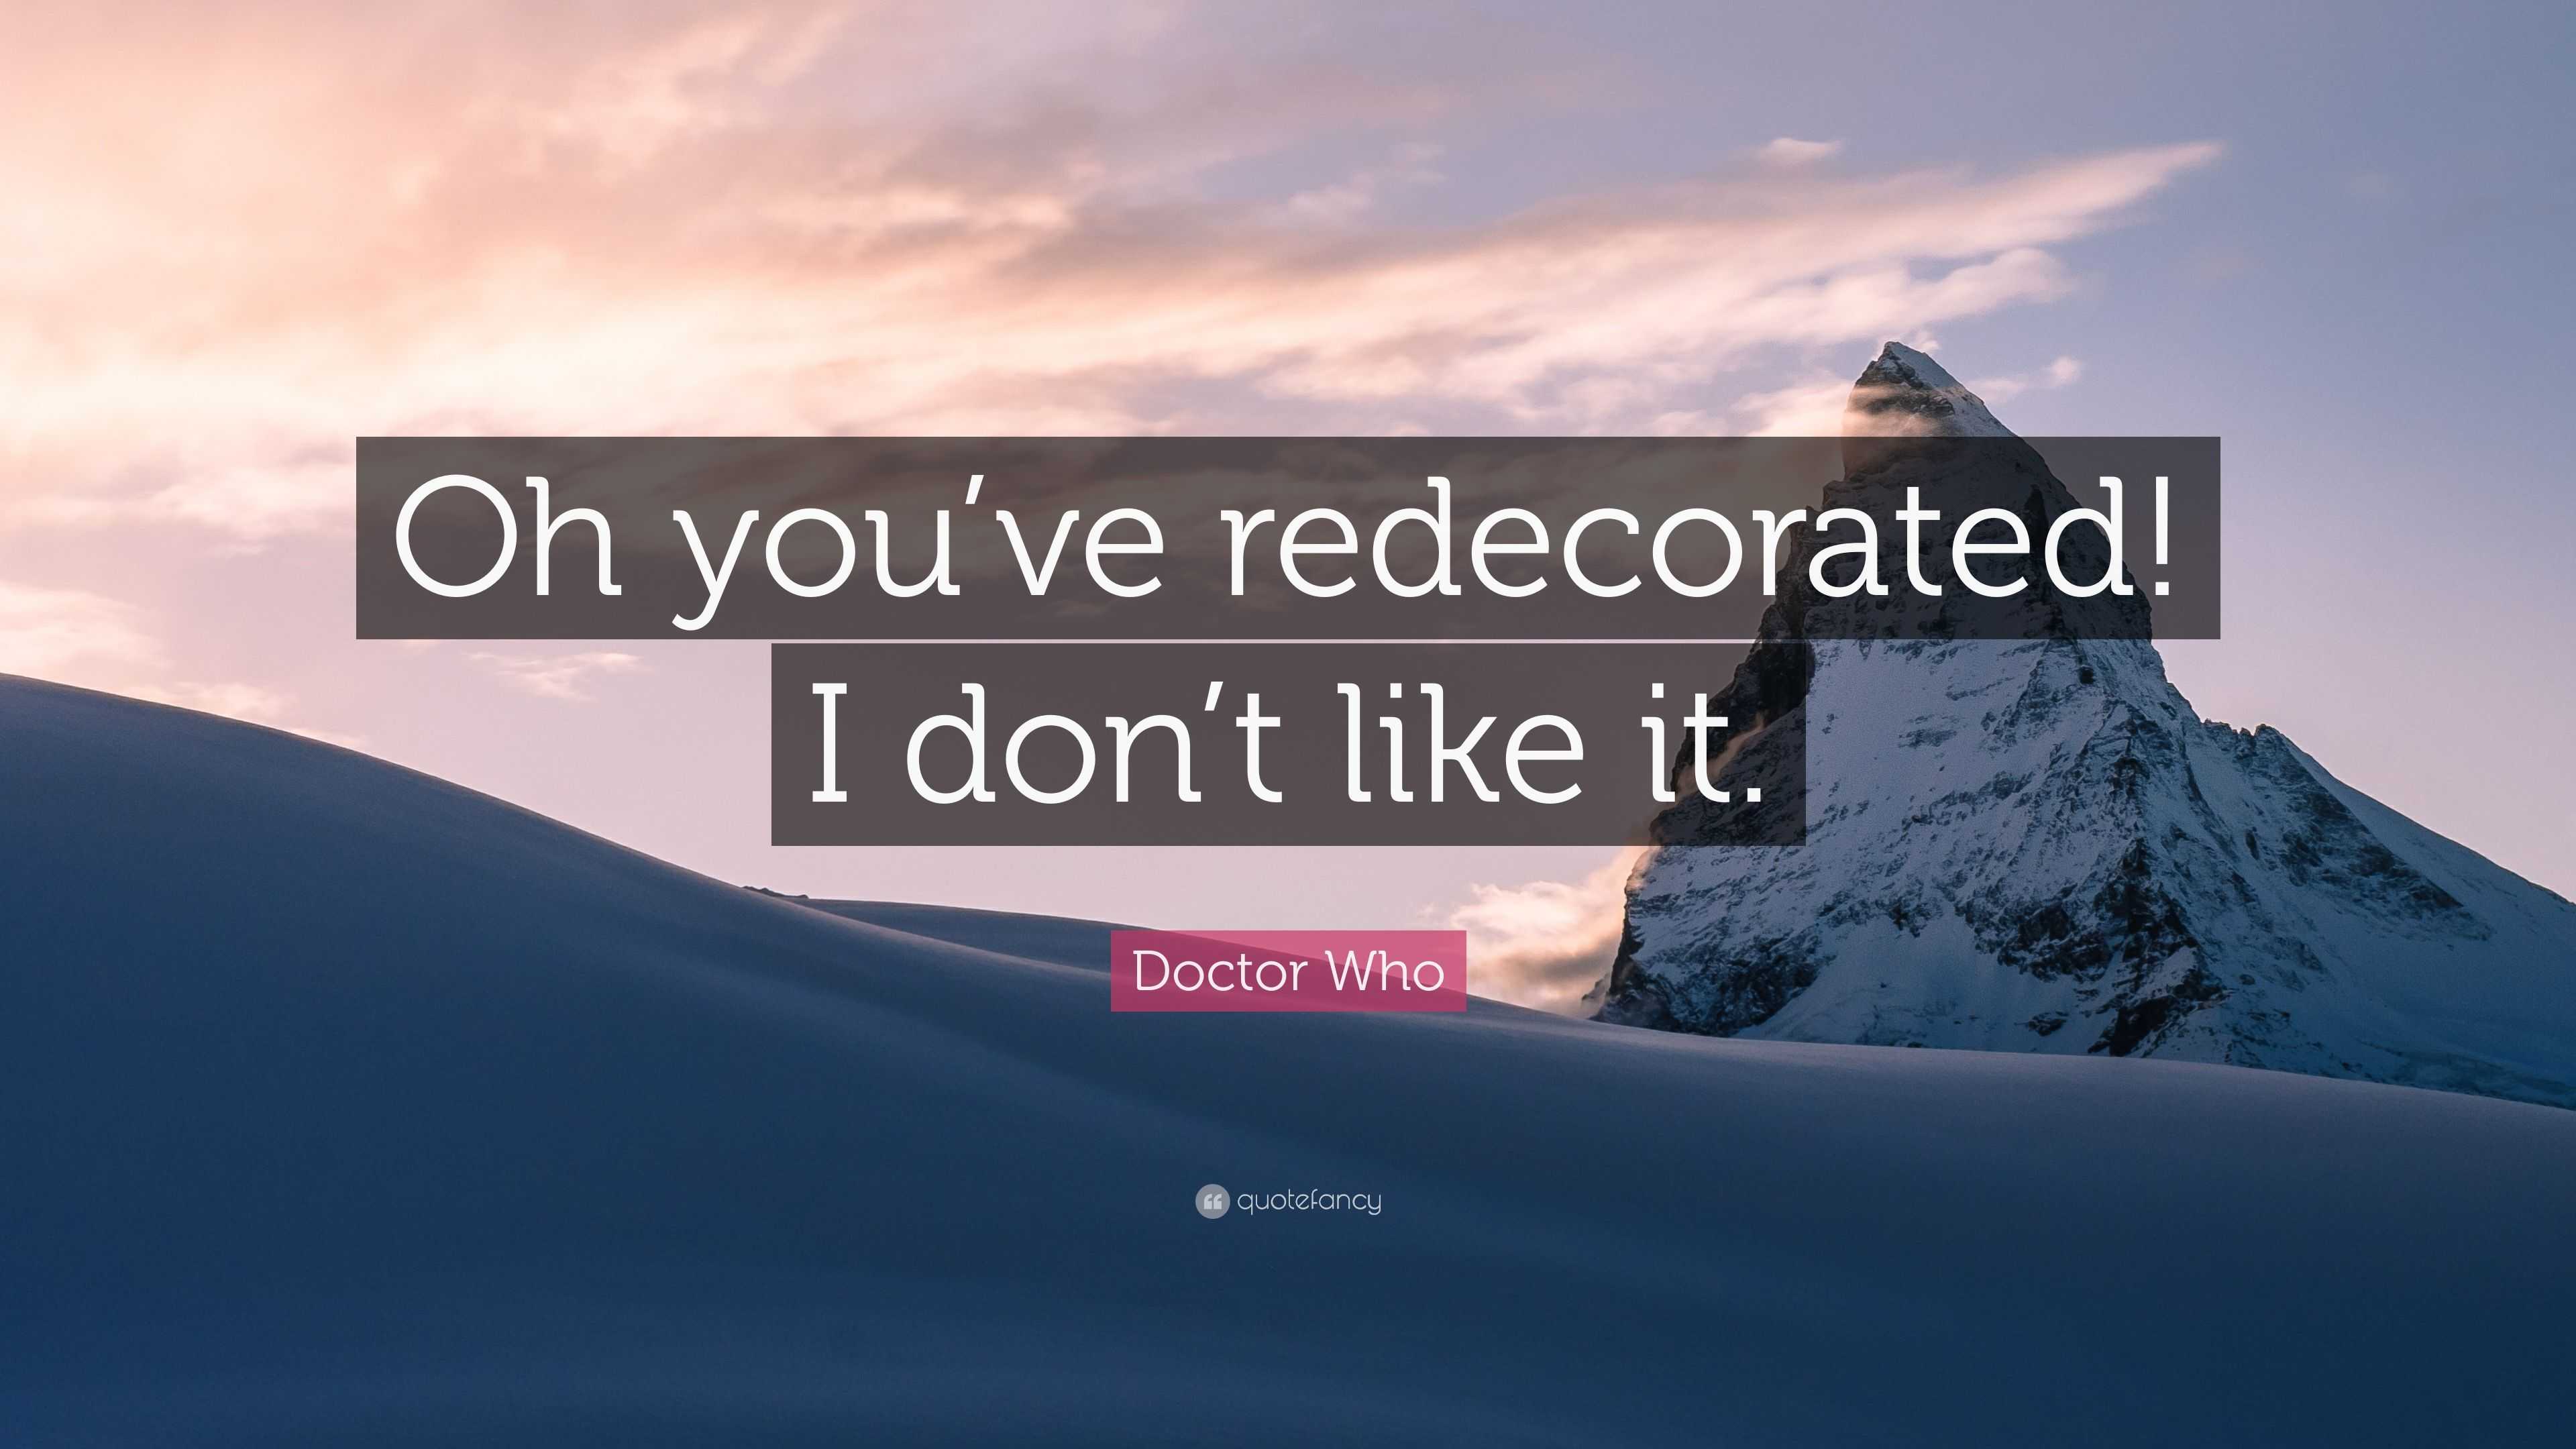 Doctor Who Quote: “Oh you\'ve redecorated! I don\'t like it.”